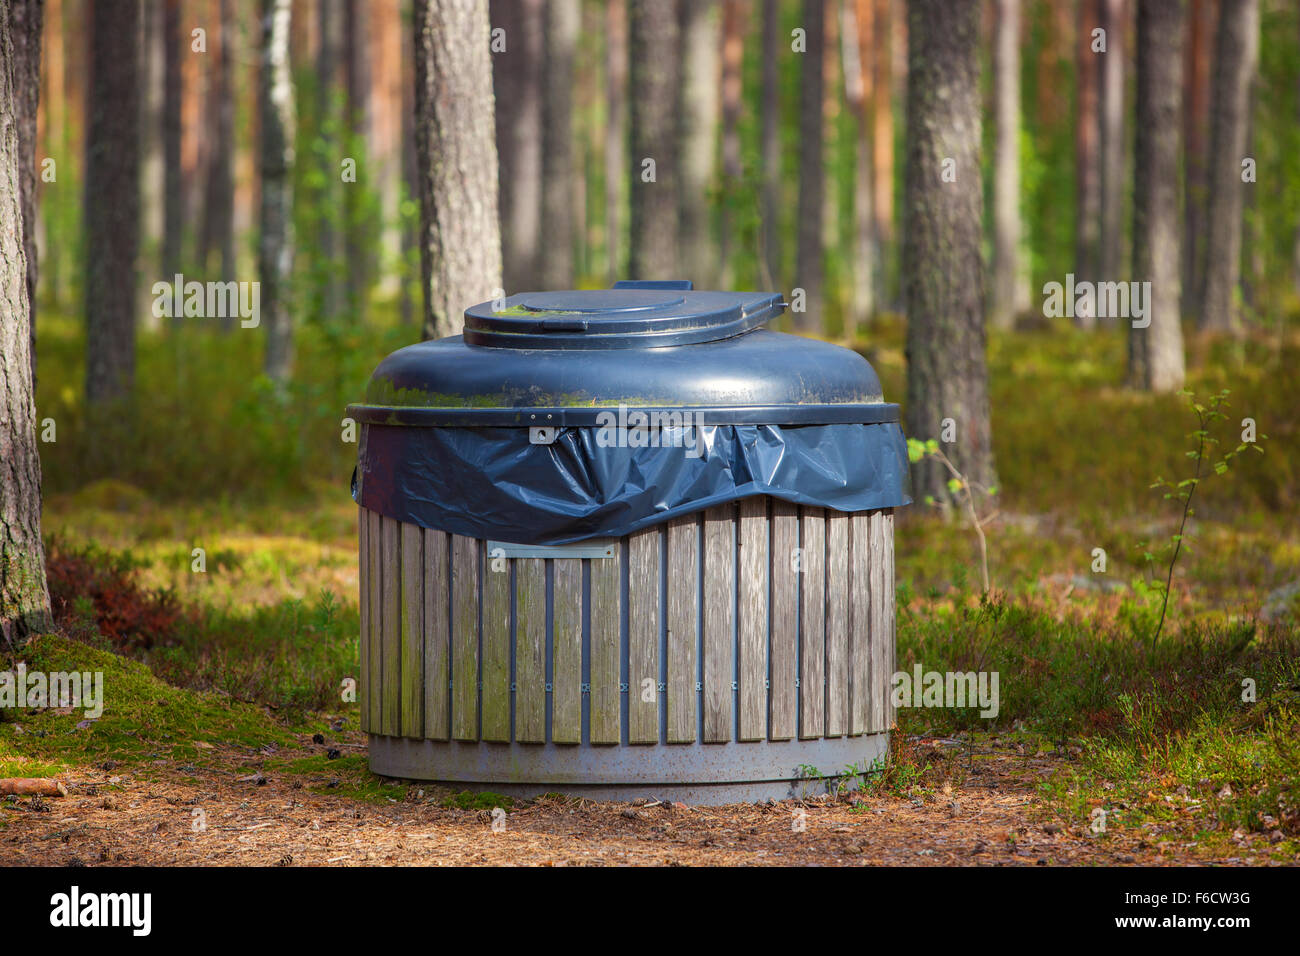 https://c8.alamy.com/comp/F6CW3G/big-refuse-bin-in-forest-for-tourists-F6CW3G.jpg